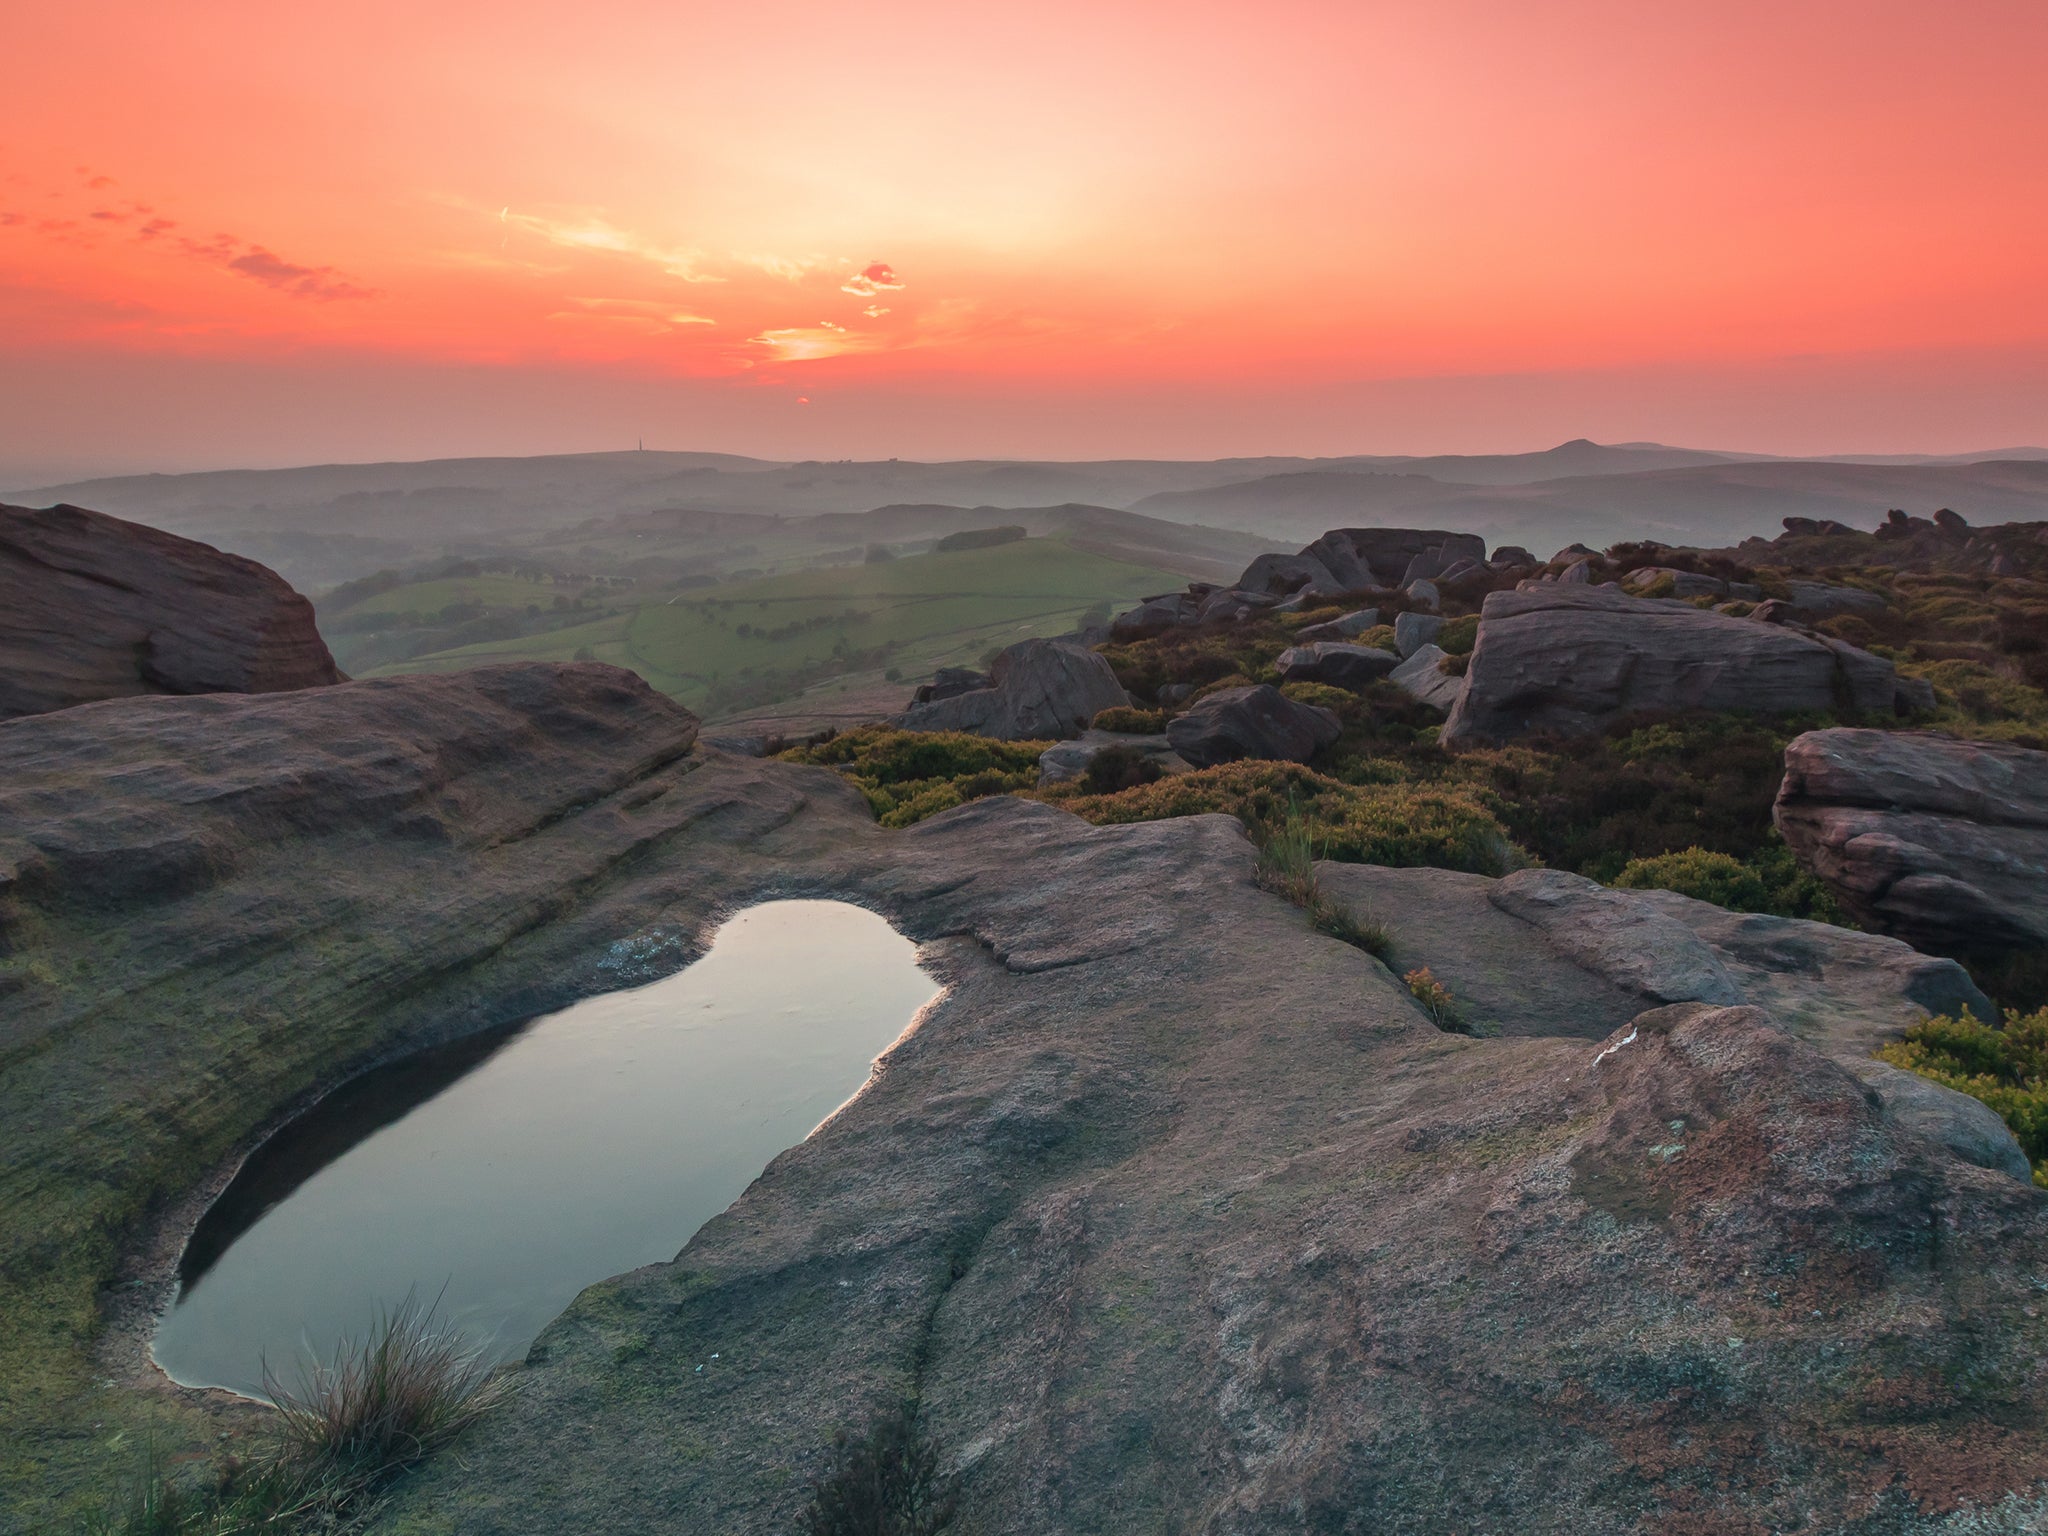 Twilight skies over The Roaches, Peak District